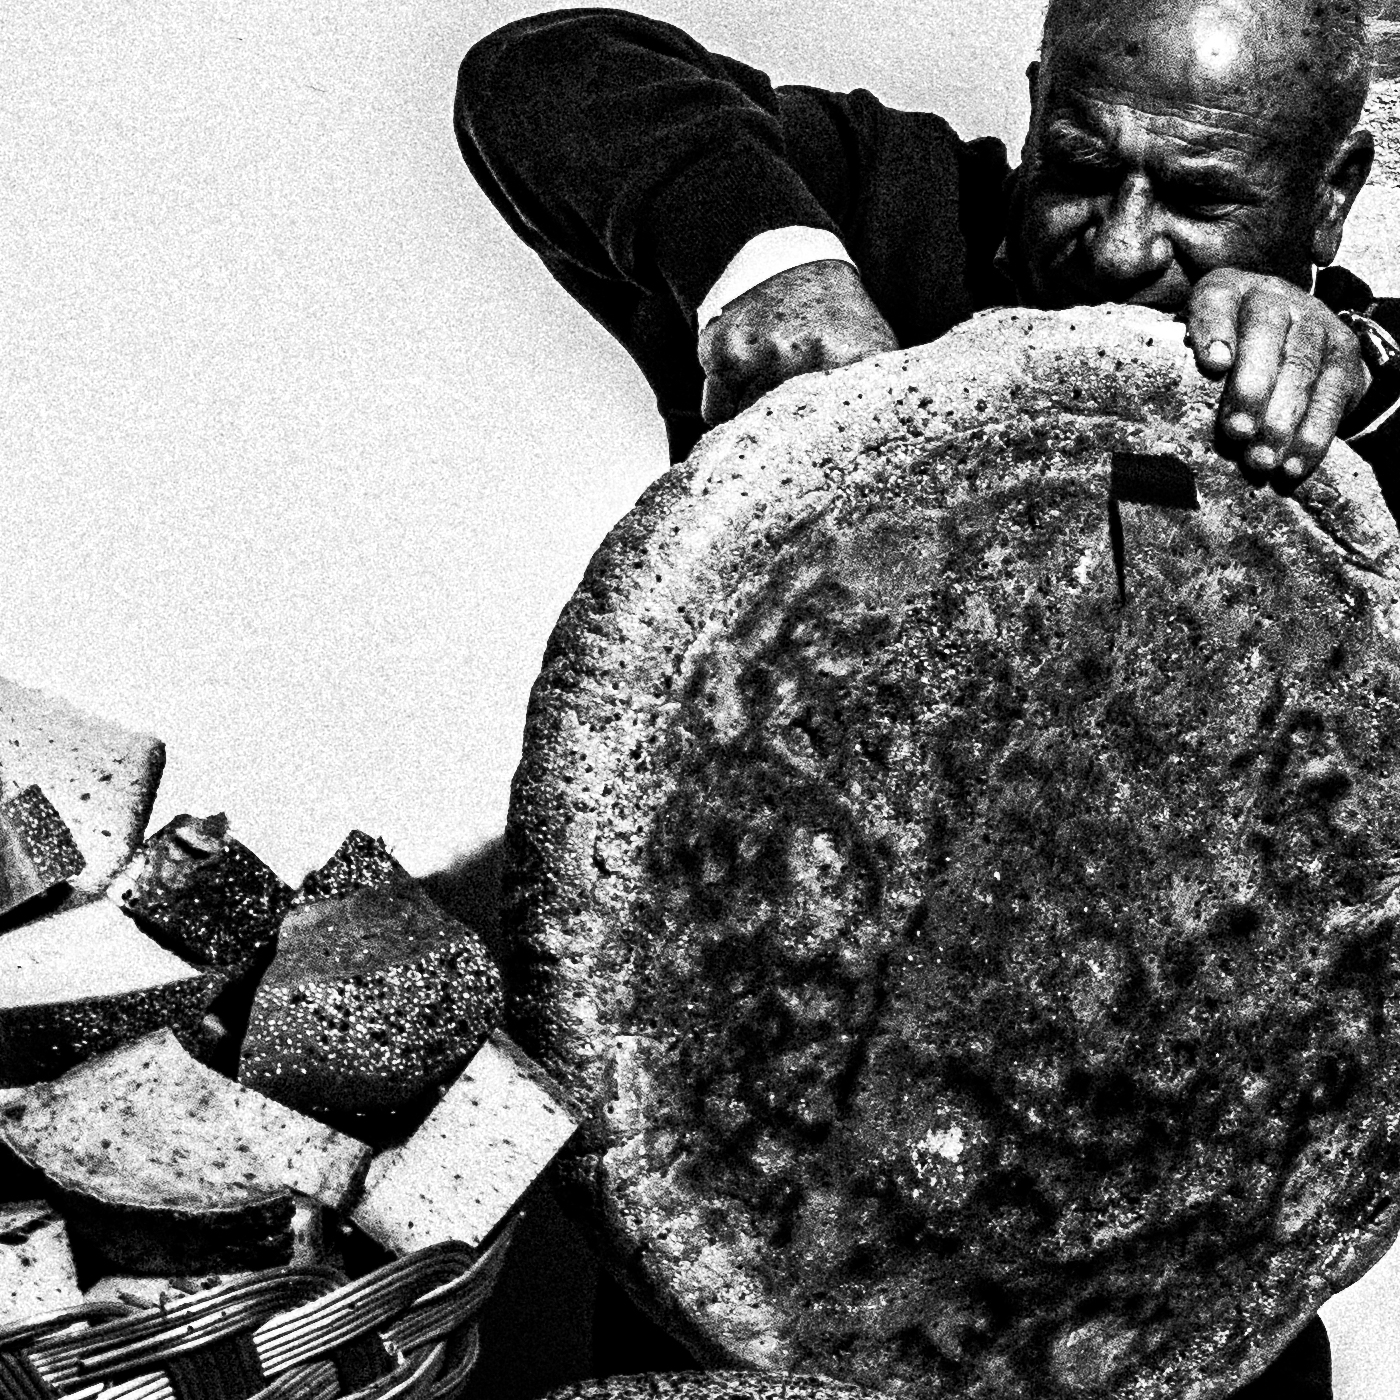 Black and White Photography Wall Art Greece | Cutting bread during a feast in Tristomo Olympos Karpathos Dodecanese by George Tatakis - detailed view